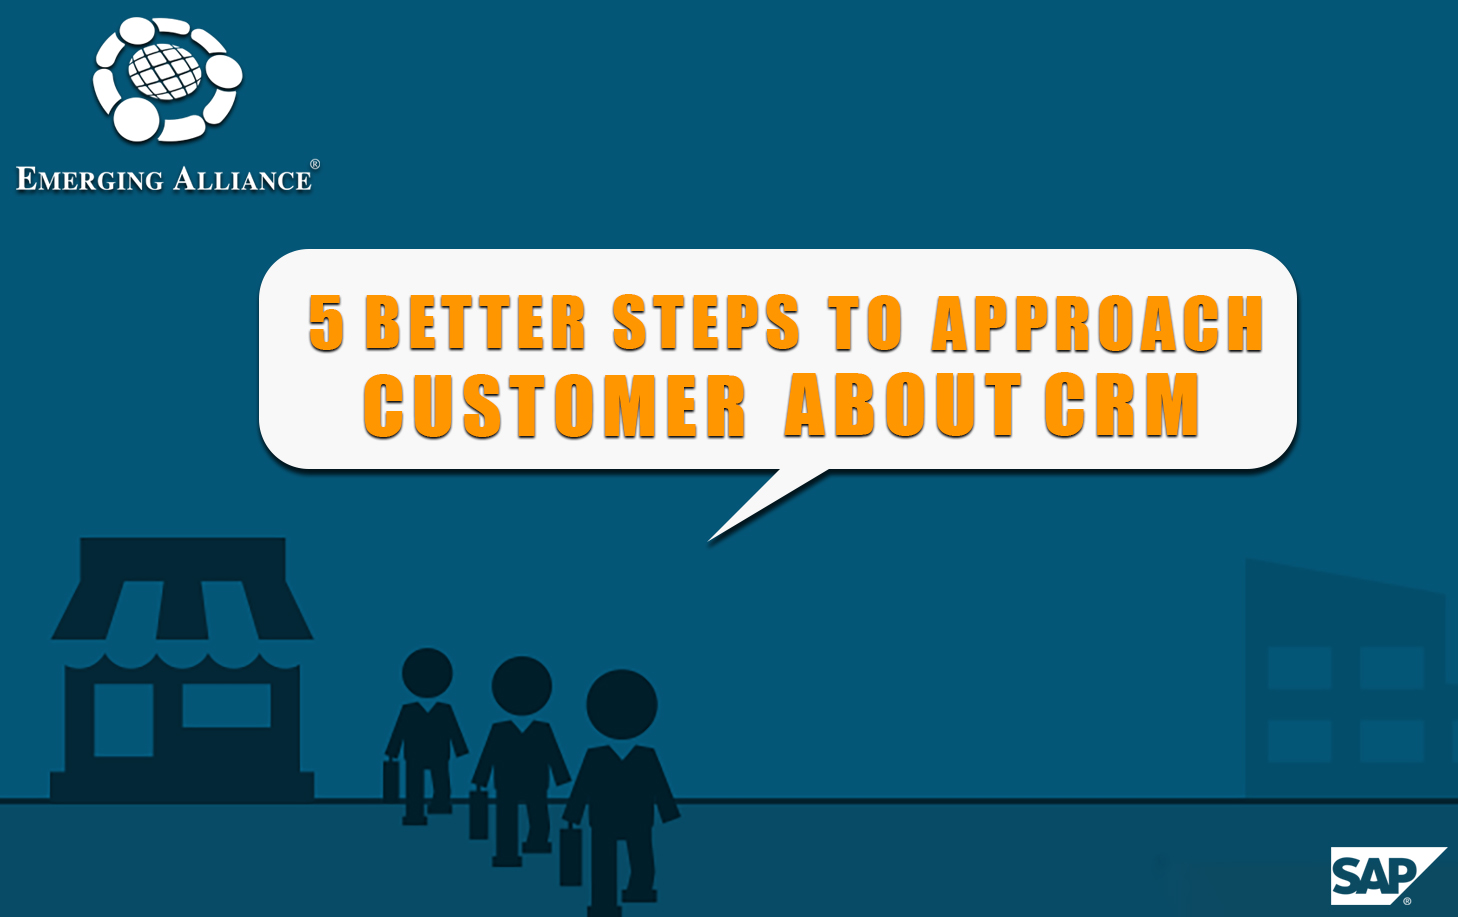 BETTER STEPS TO APPROACH CUSTOMER ABOUT CRM